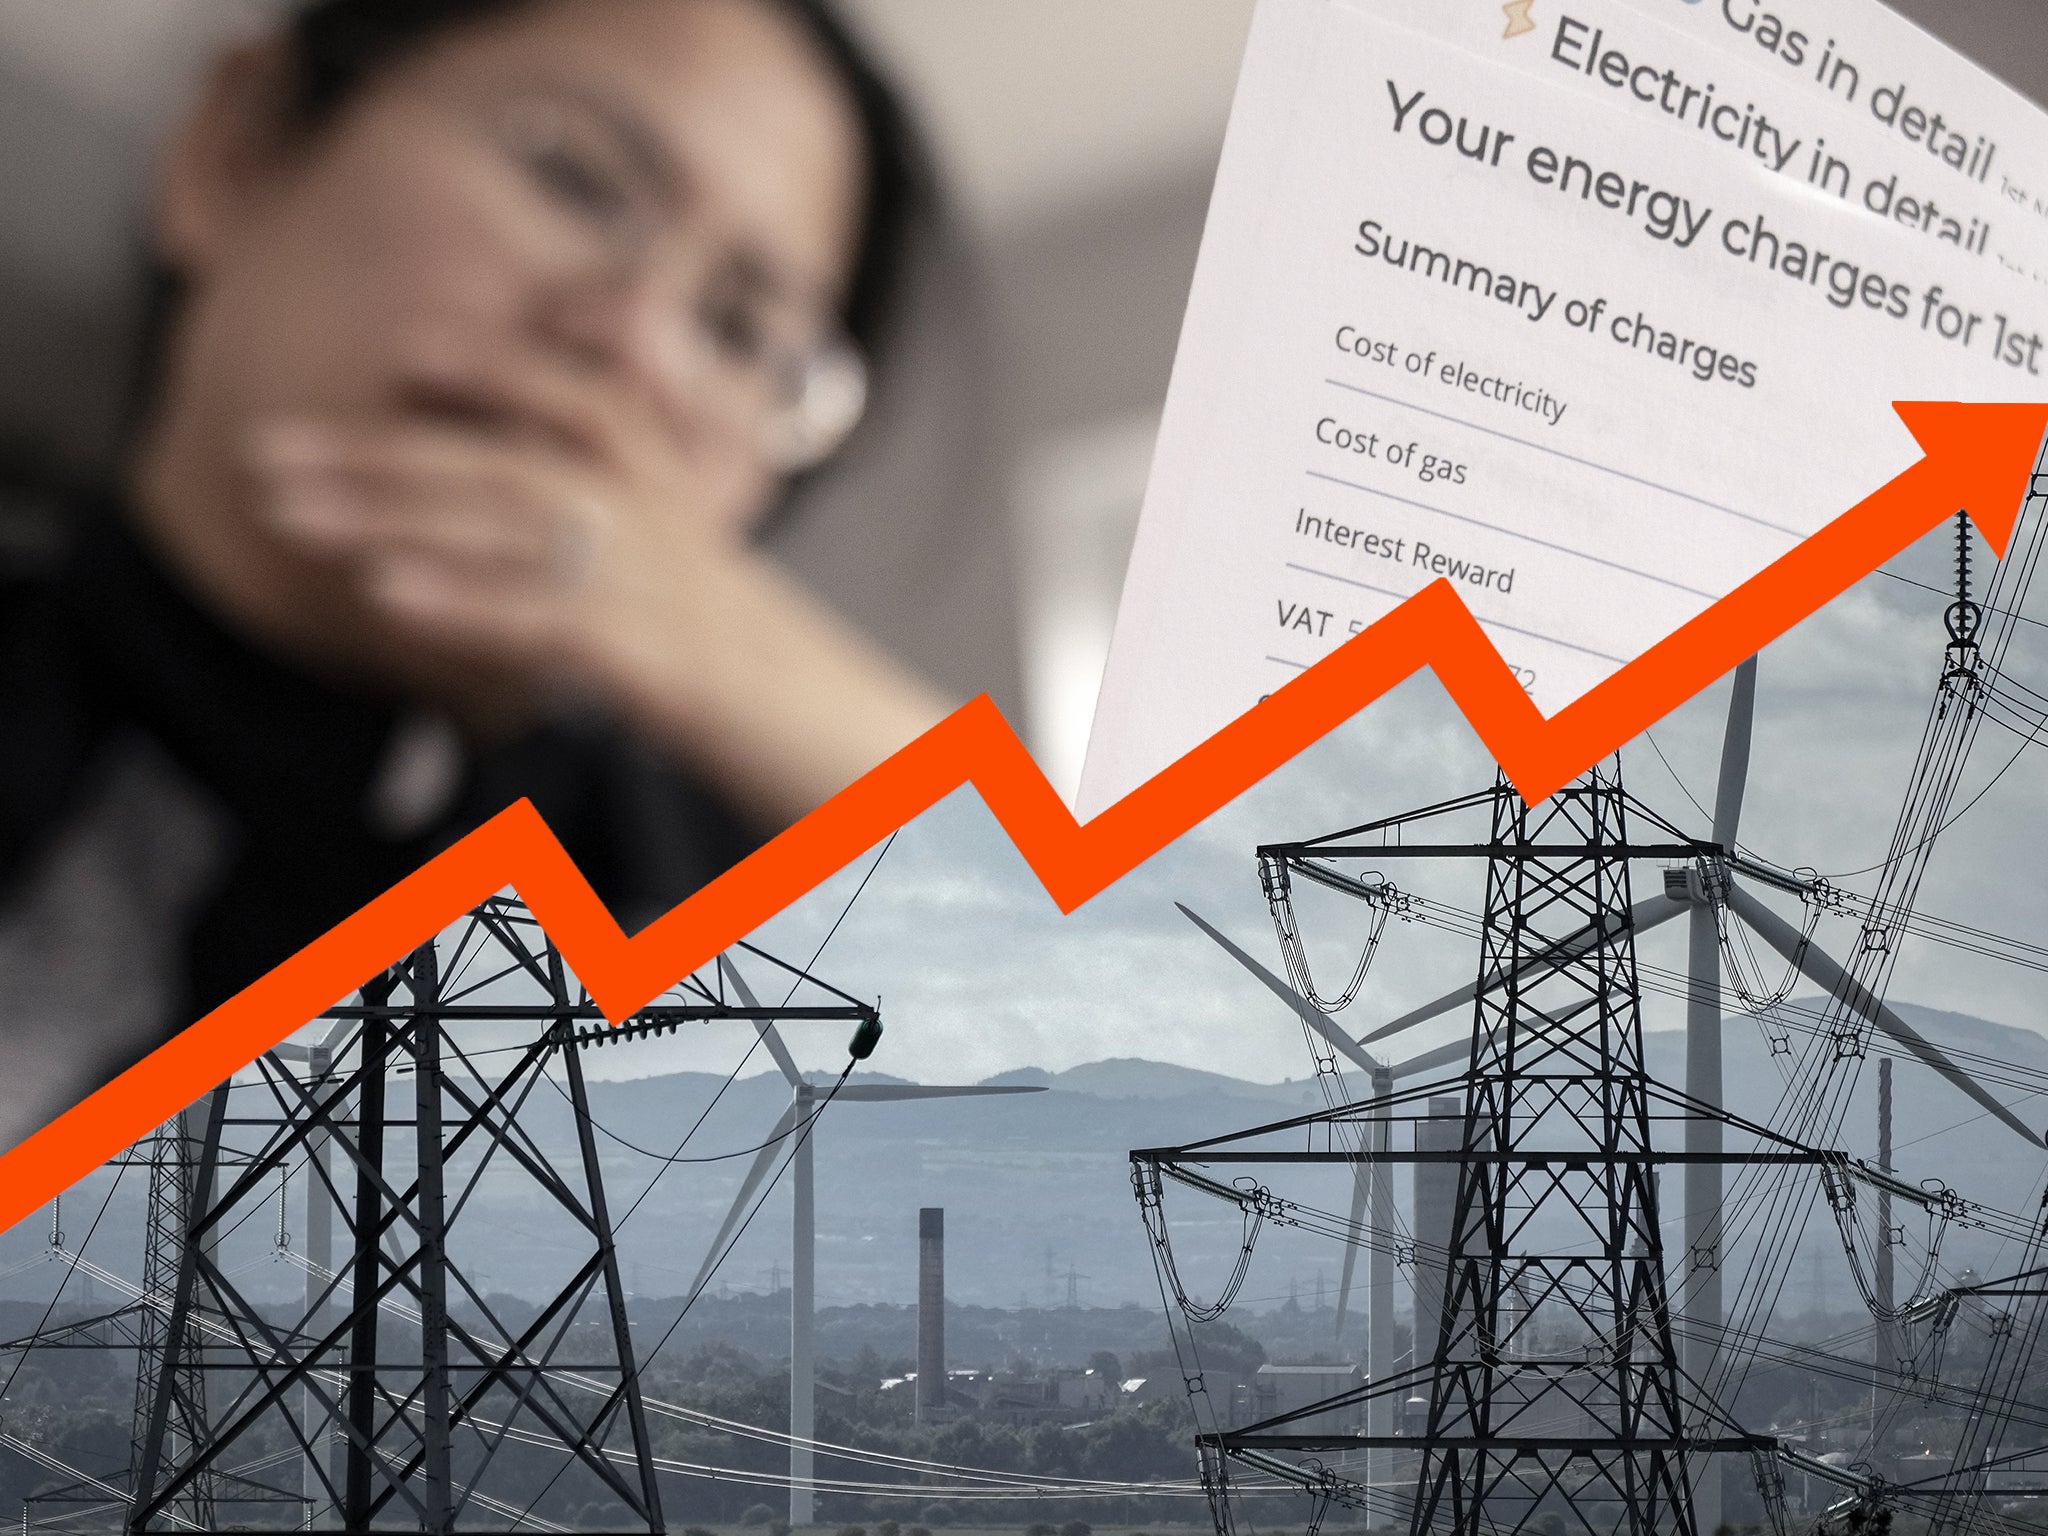 The energy price cap, calculated by Ofgem, is increasing by 54 per cent from next month